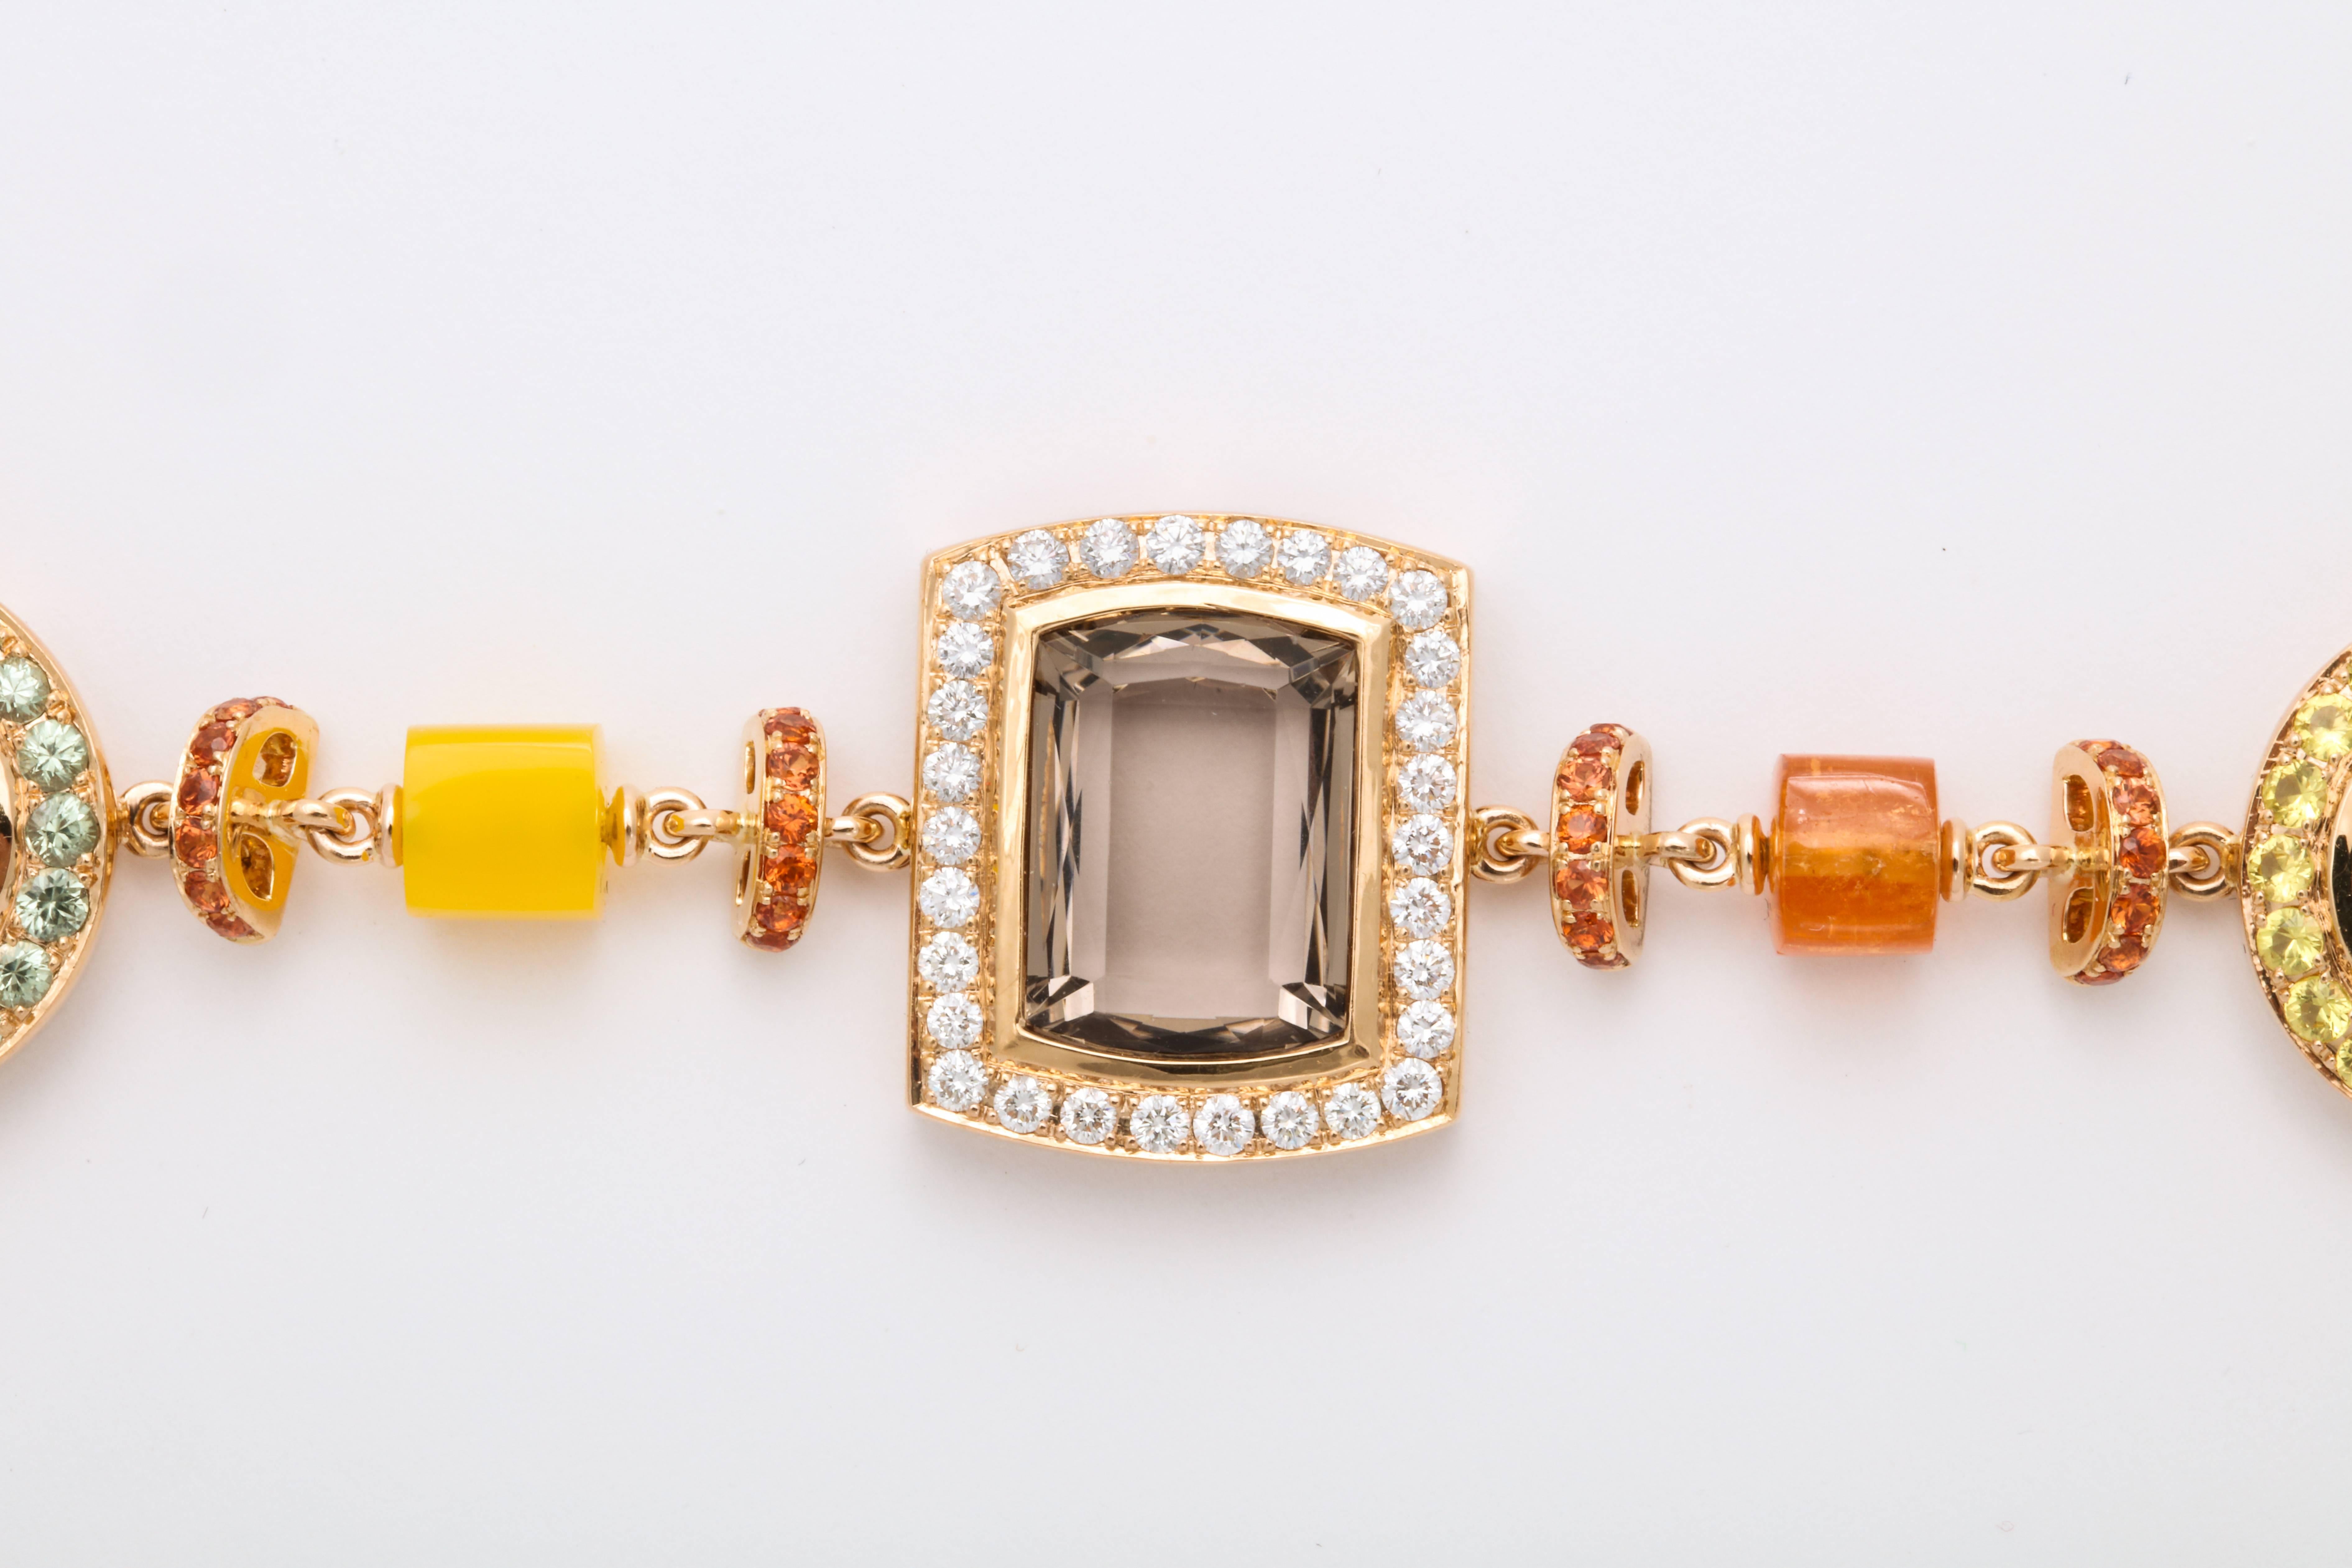 Asymmetric and artistic fancy link 18 Karat Rose Gold bracelet mounted with faceted smokey topaz: 18.96 carats, decorated with round brilliant cut diamonds: 0.91 carats; green sapphires: 1.18 carats; orange sapphires: 1.64 carats; yellow sapphires: